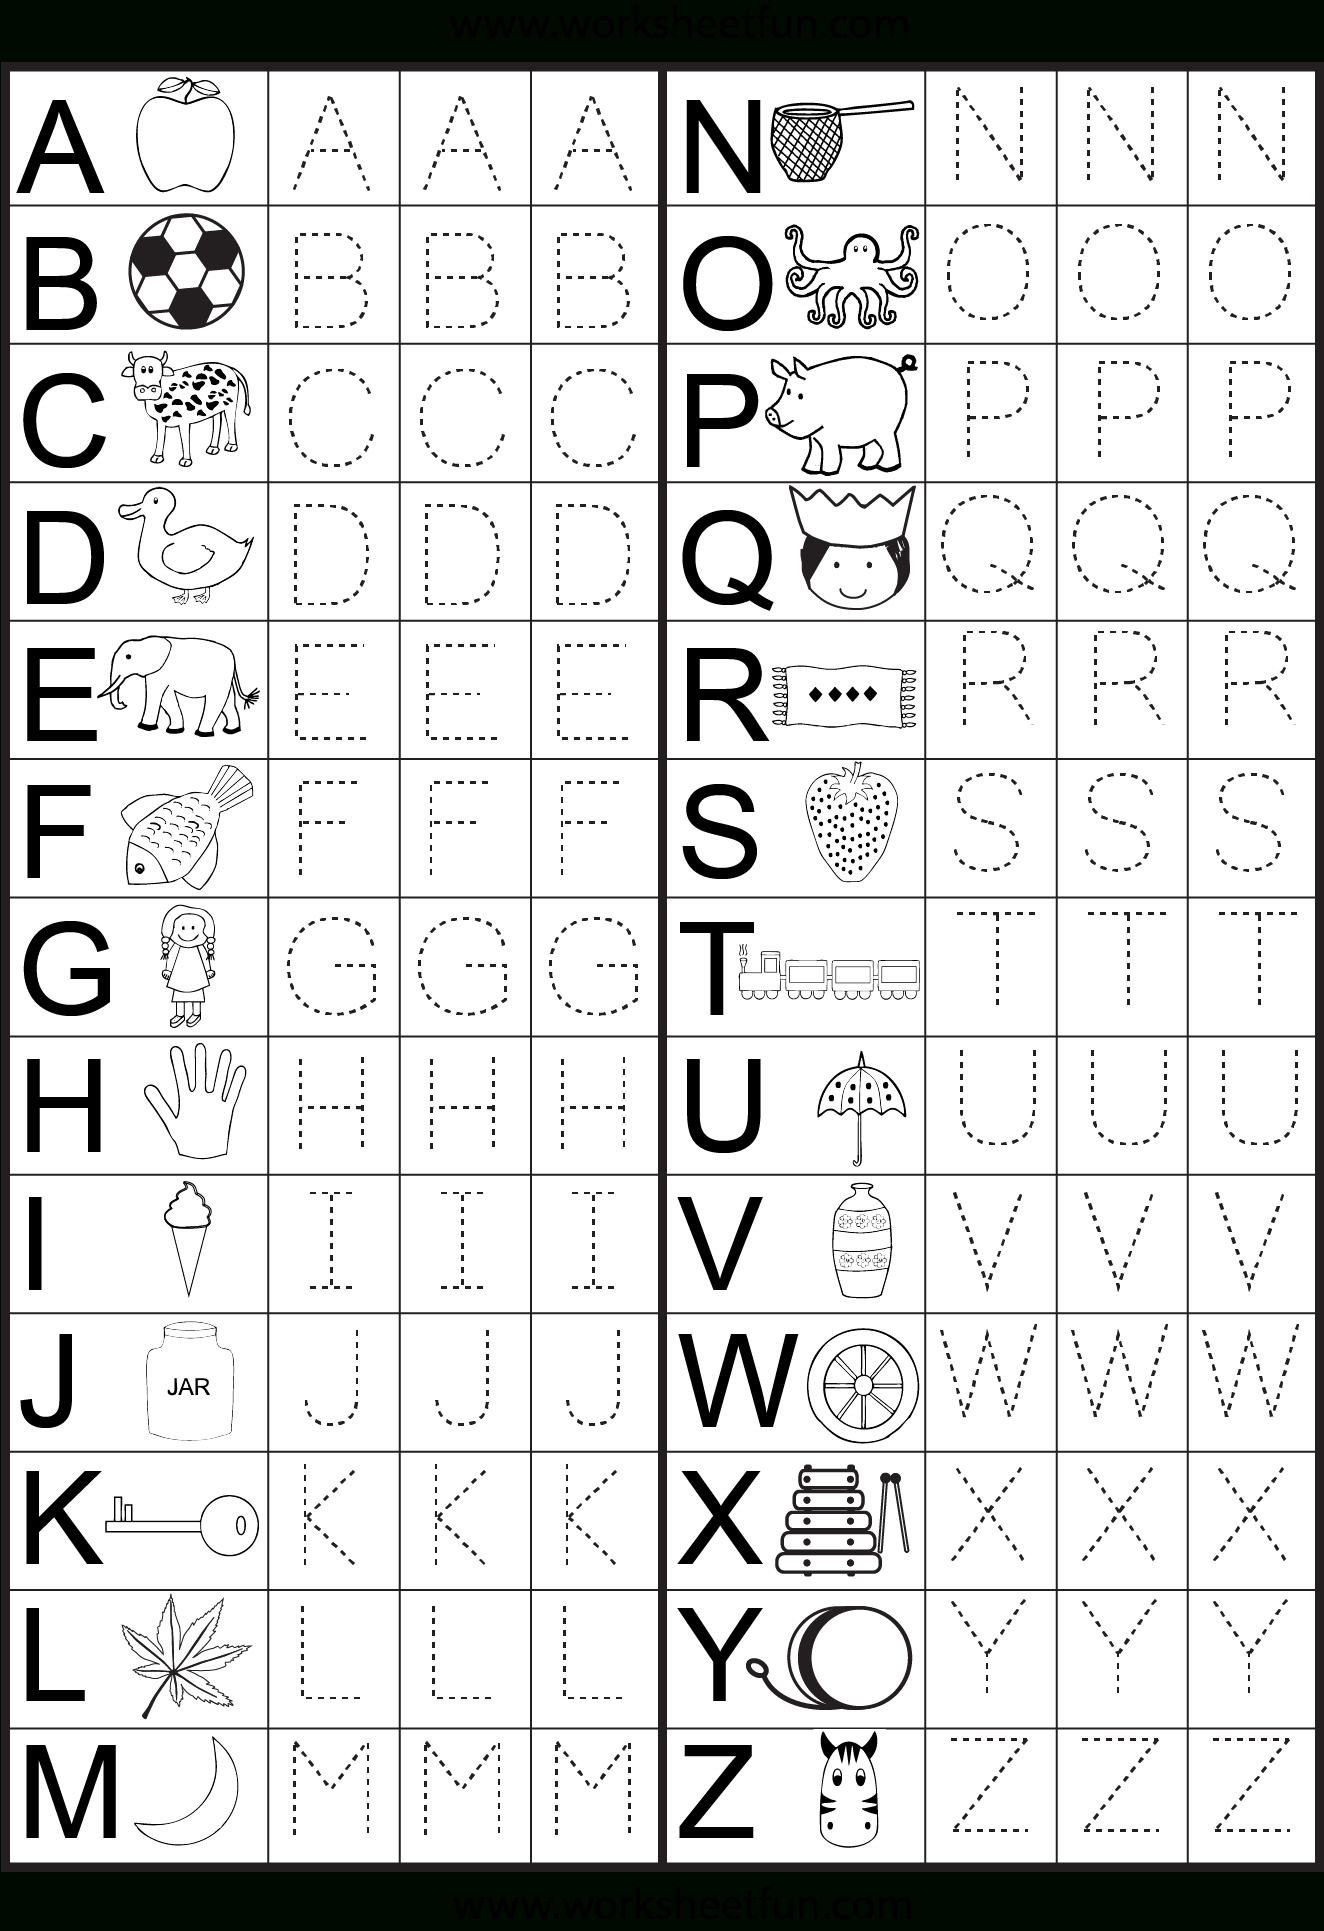 I Just Printed Off 13 Worksheets From This Website within Alphabet Worksheets For Kindergarten